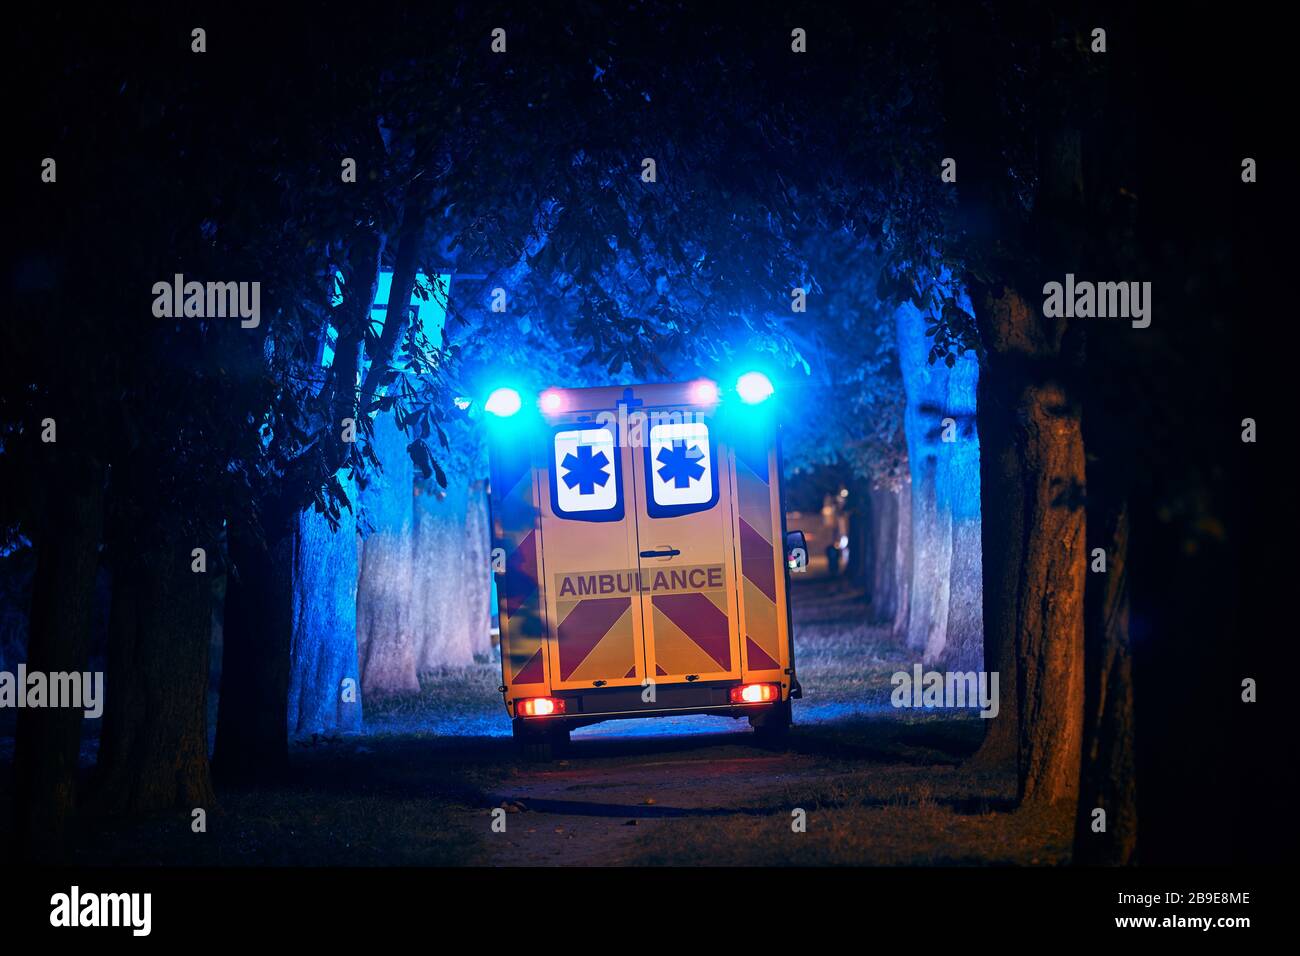 Rear view of ambulance of emergency medical service against dark alley. Themes rescue, hope and health care. Stock Photo